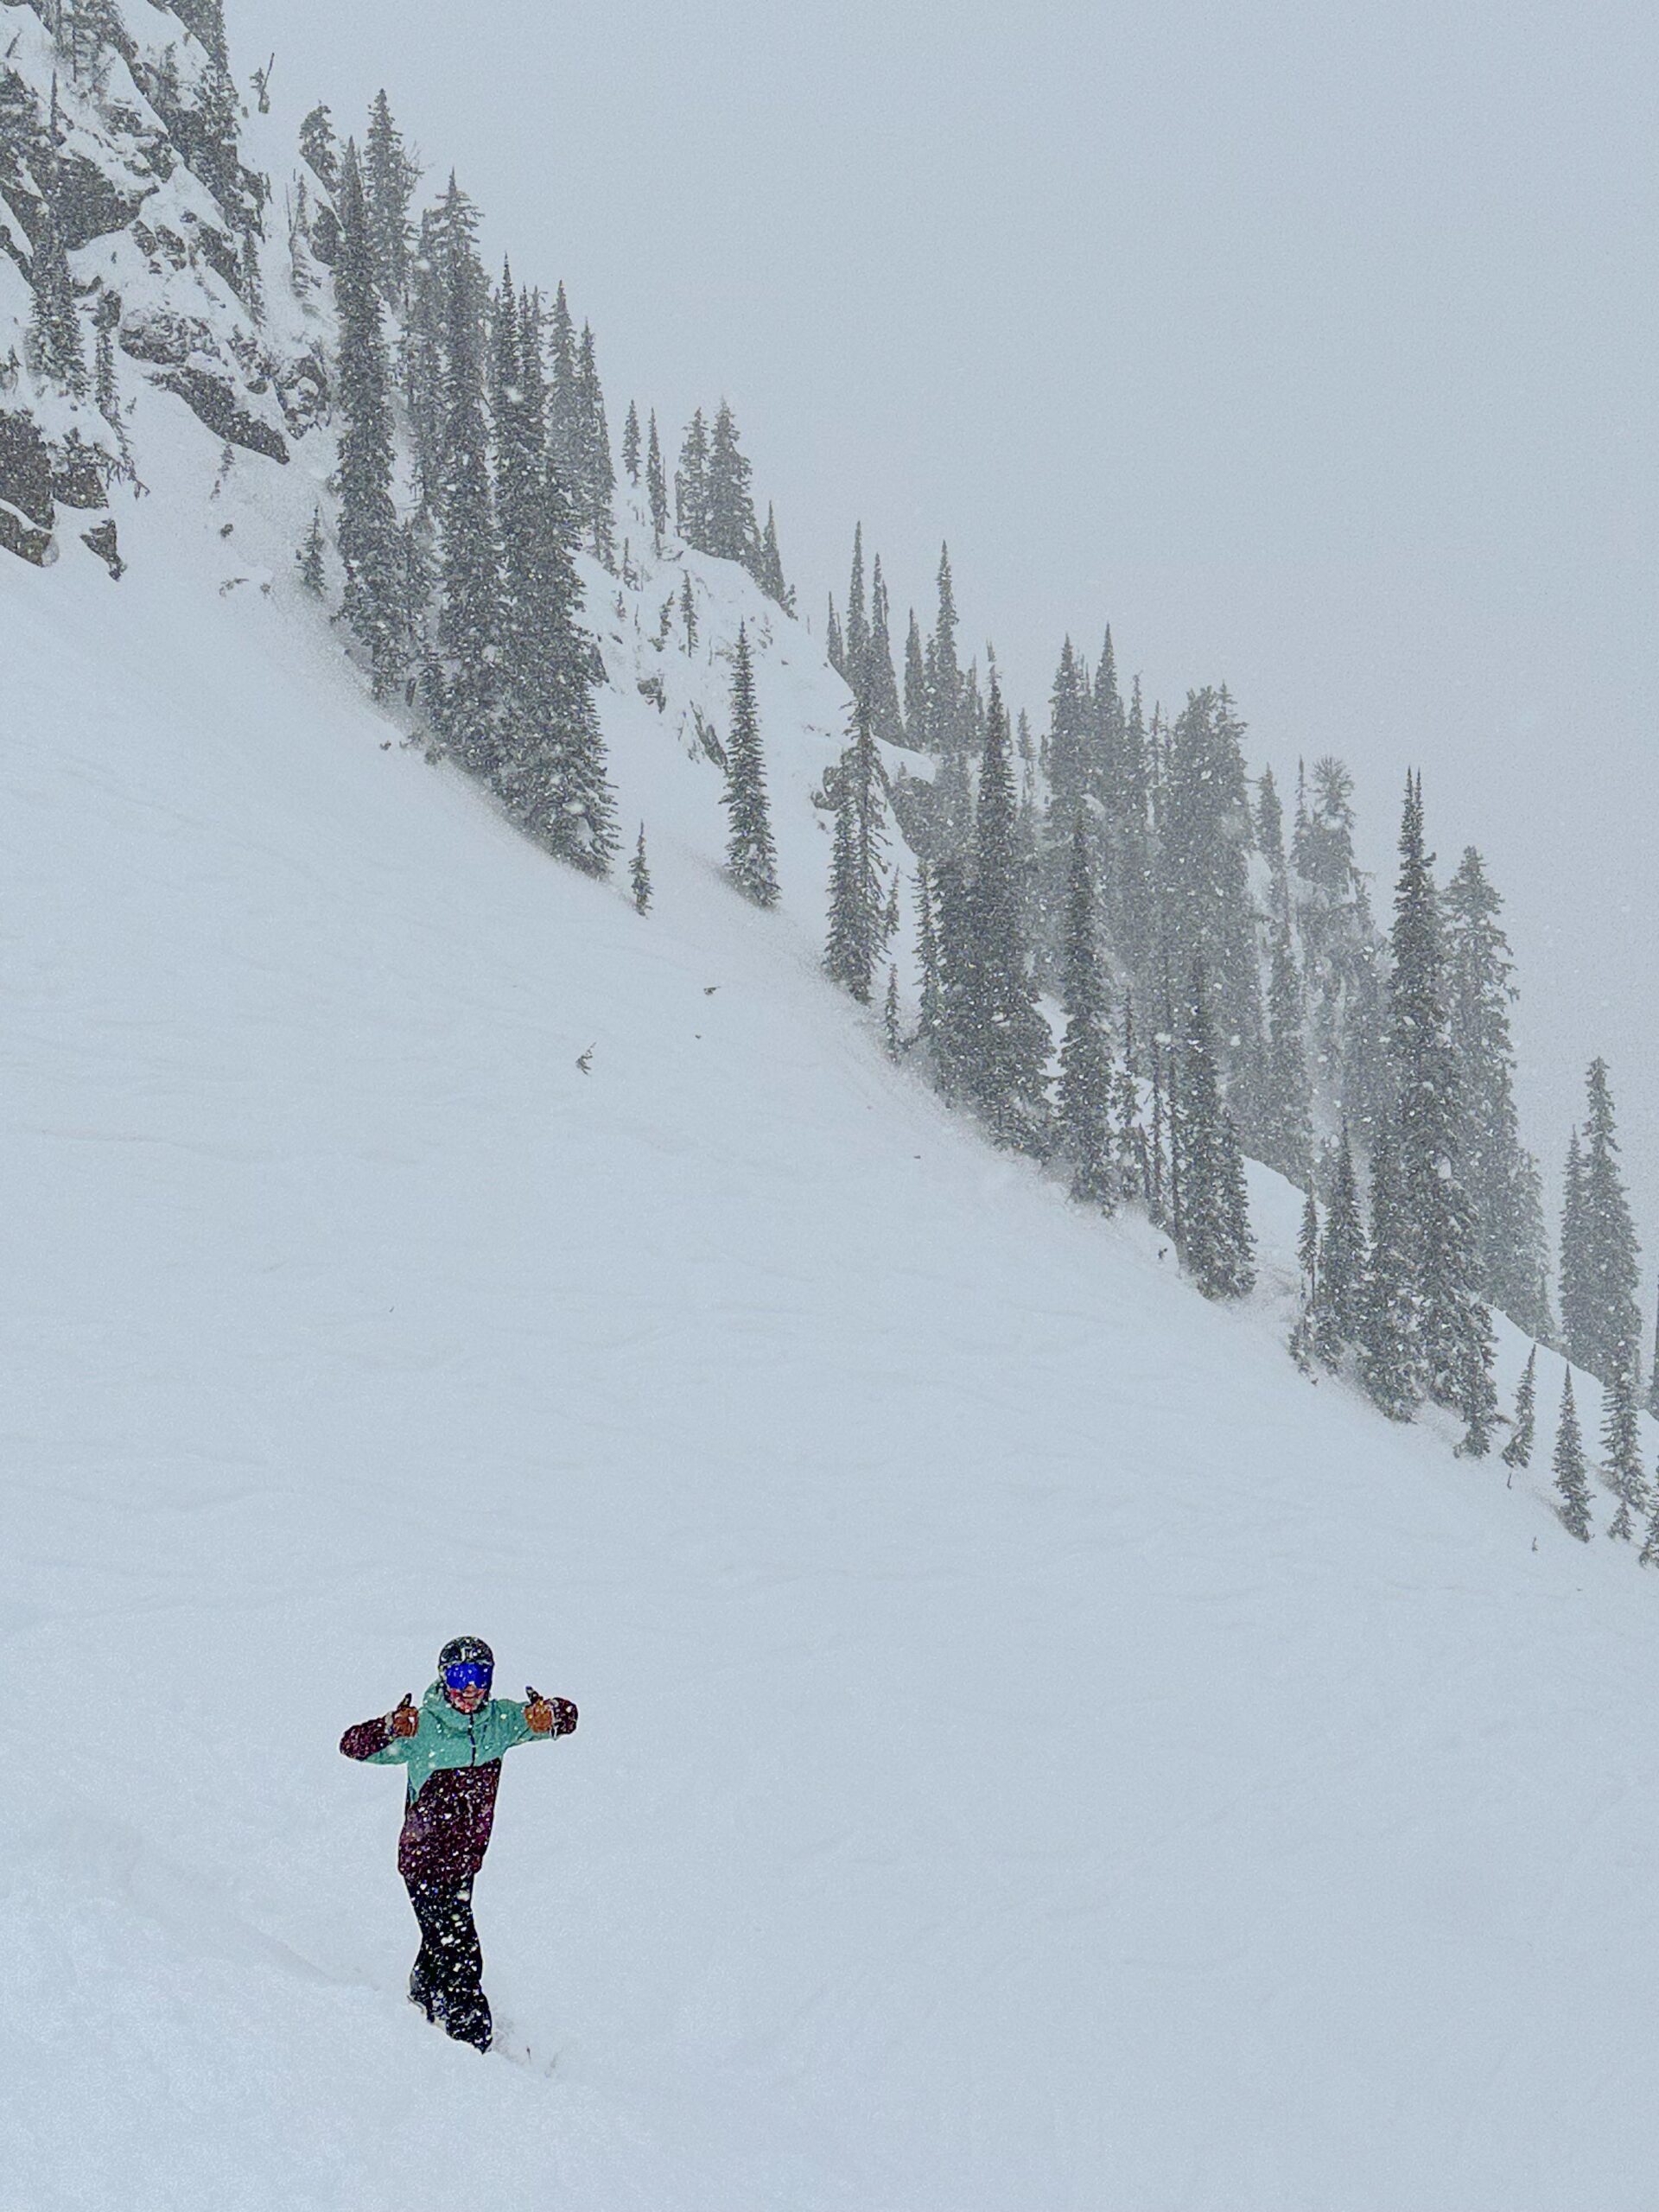 In the North Bowl at Revelstoke